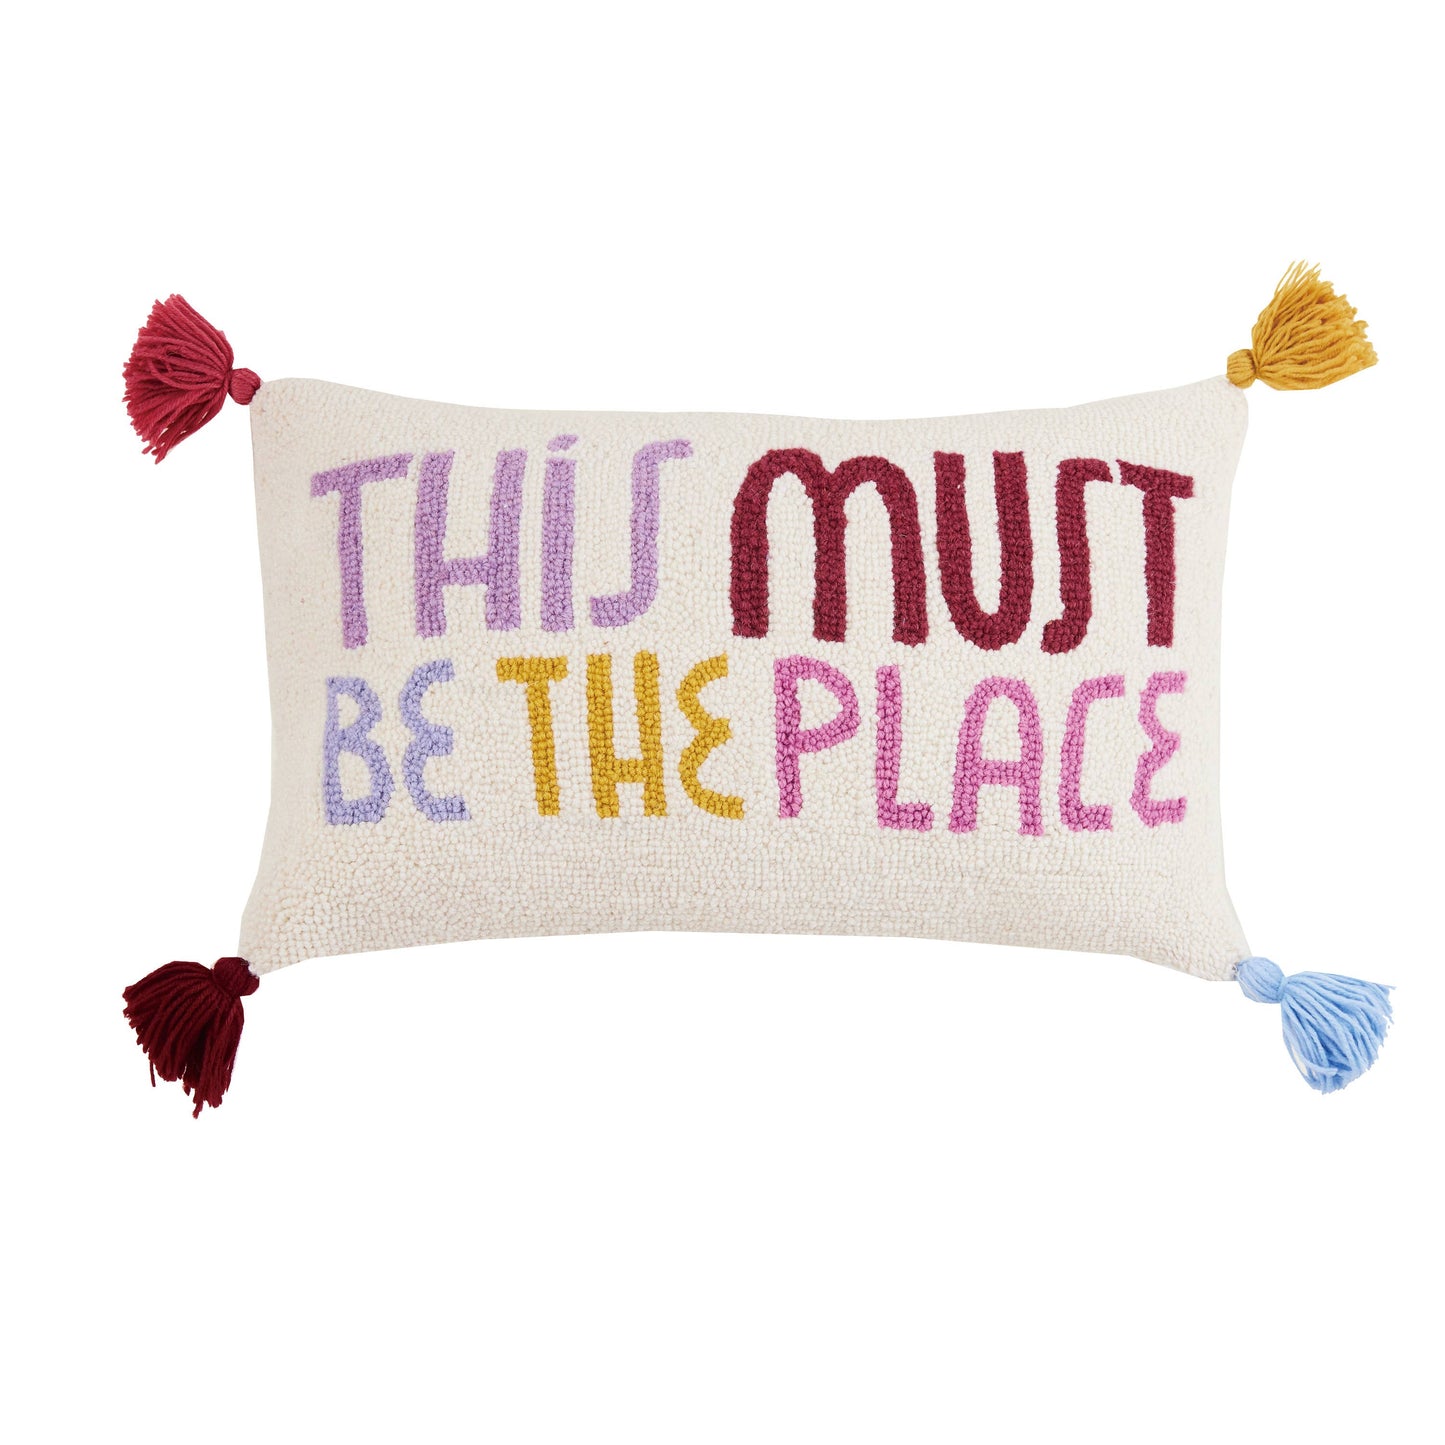 This Must Be The Place With Tassels Hook Pillow